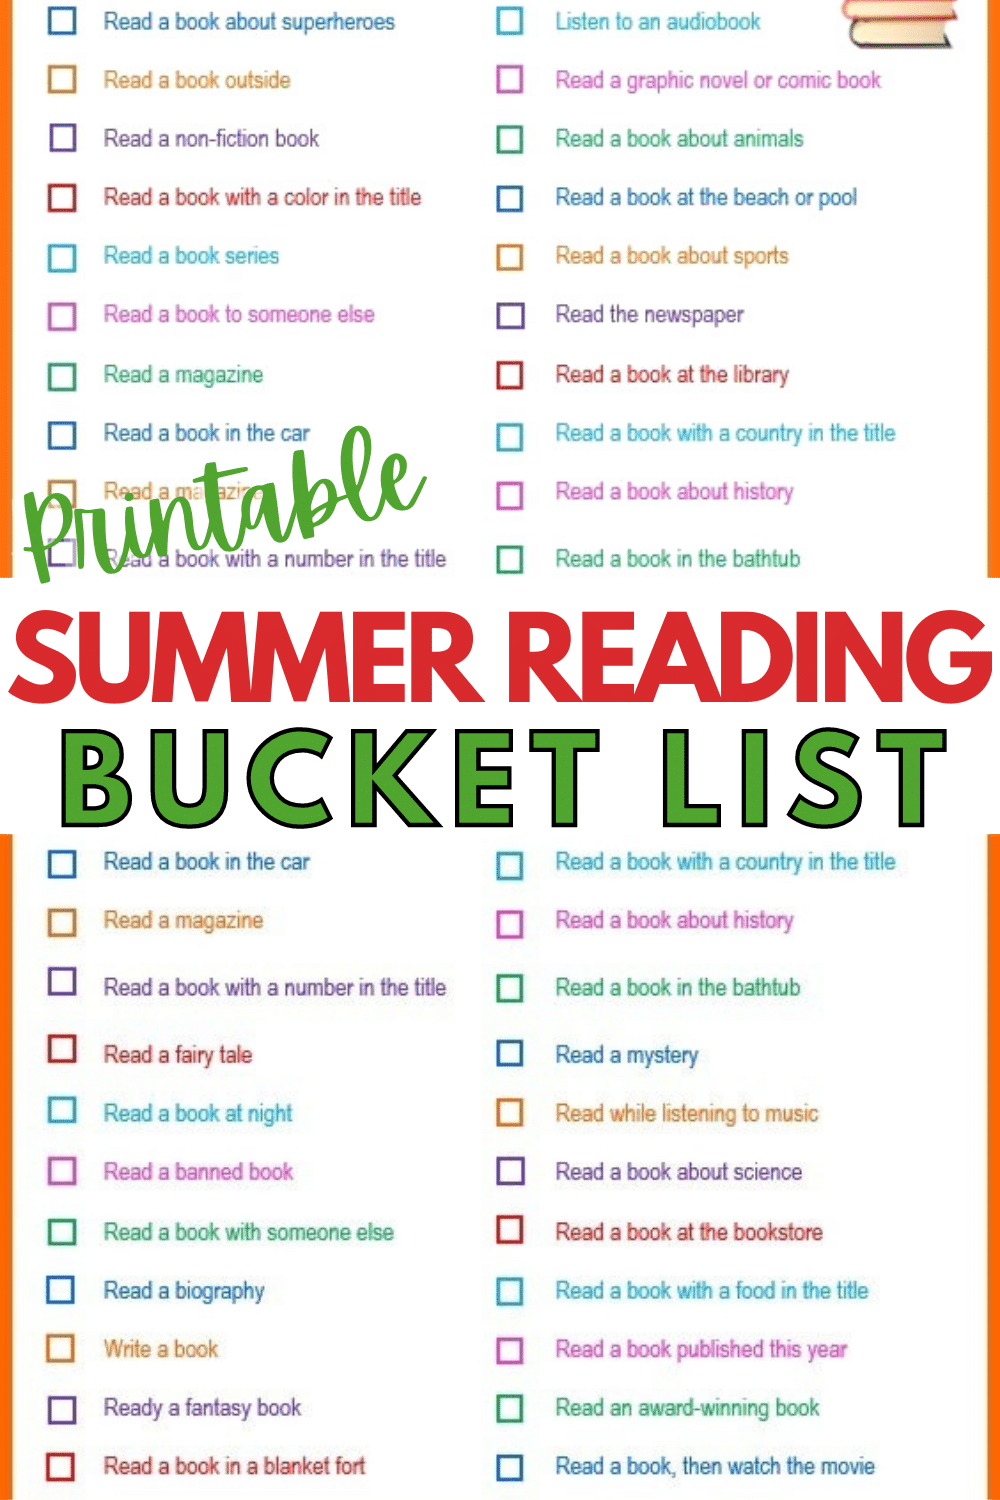 This summer reading bucket list challenges kids to read a variety of books in different ways and places. It's a fun and easy way to keep kids interested in reading over summer break. #summerreading #bucketlist #forkids #kidsactivities via @wondermomwannab